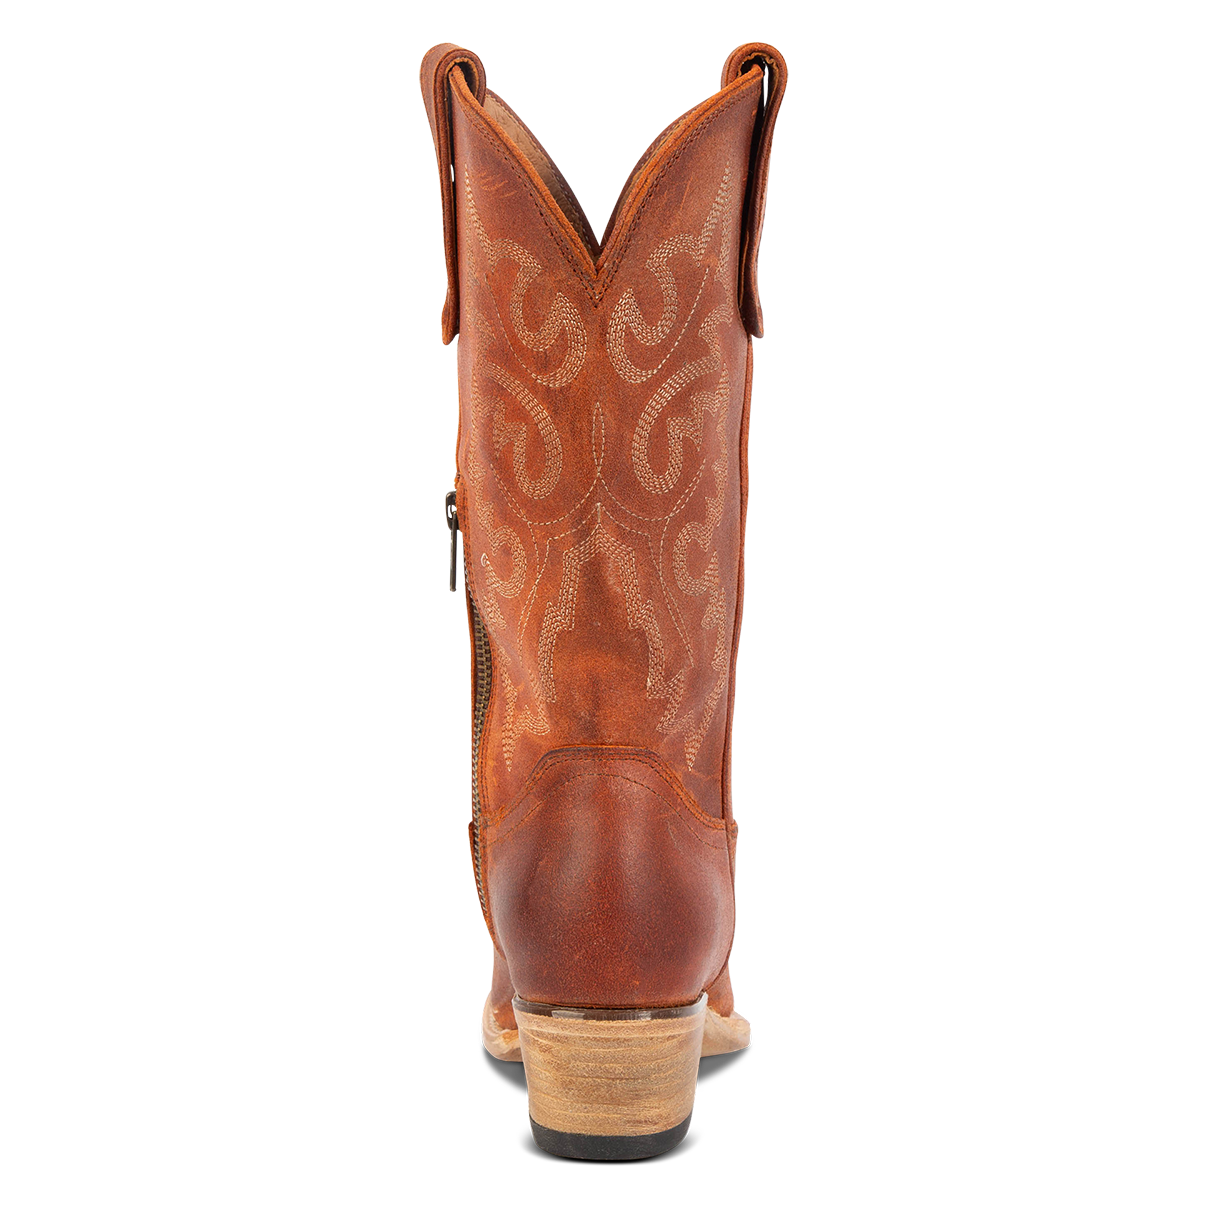 Back view showing intricate stitching and low heel on FREEBIRD women's Wilson rust suede western boot